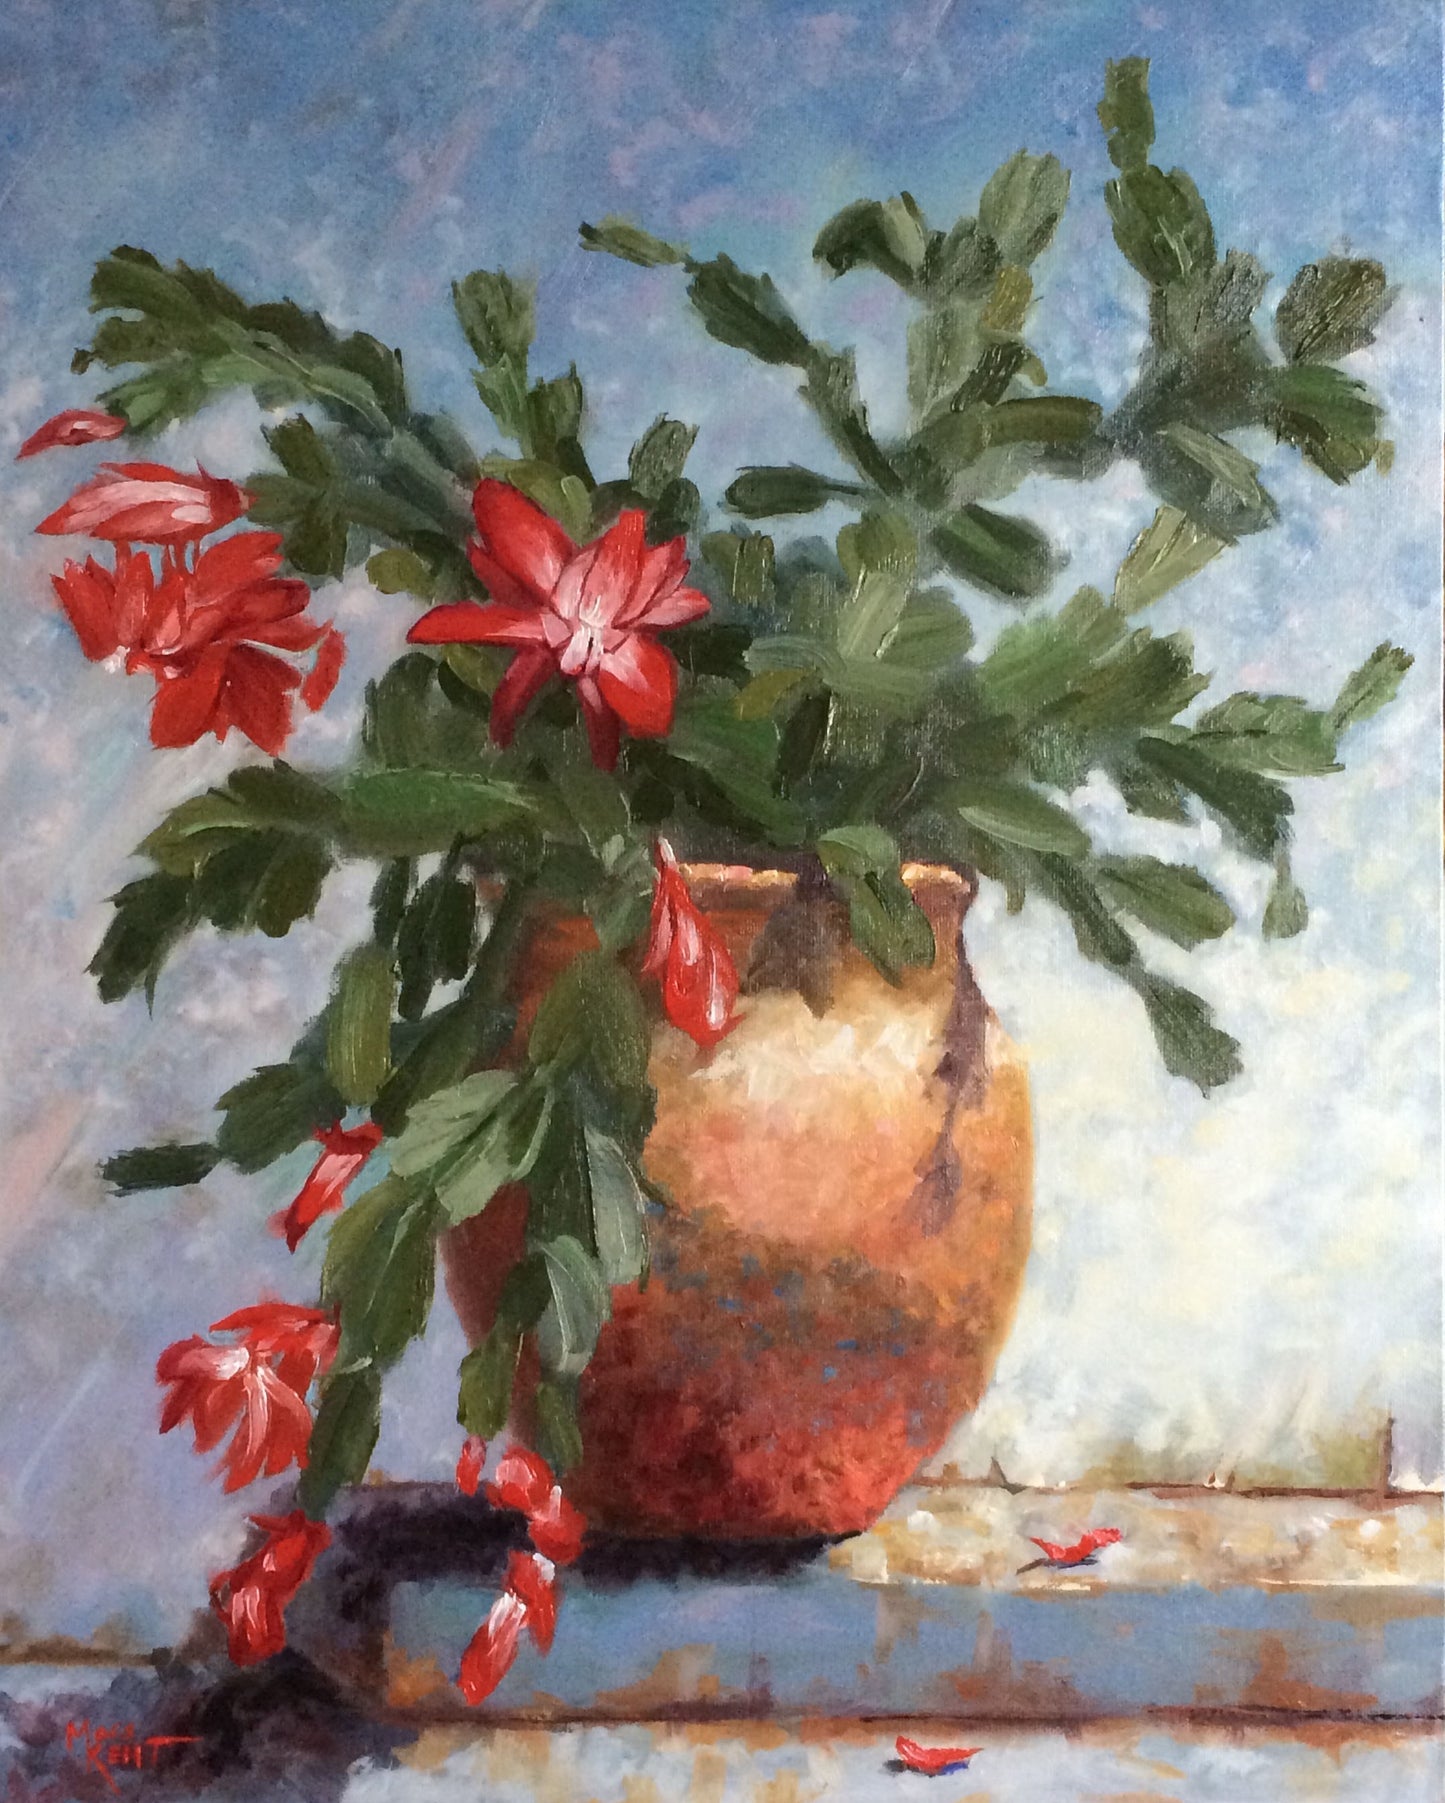 original oil painting of a Christmas cactus in bloom